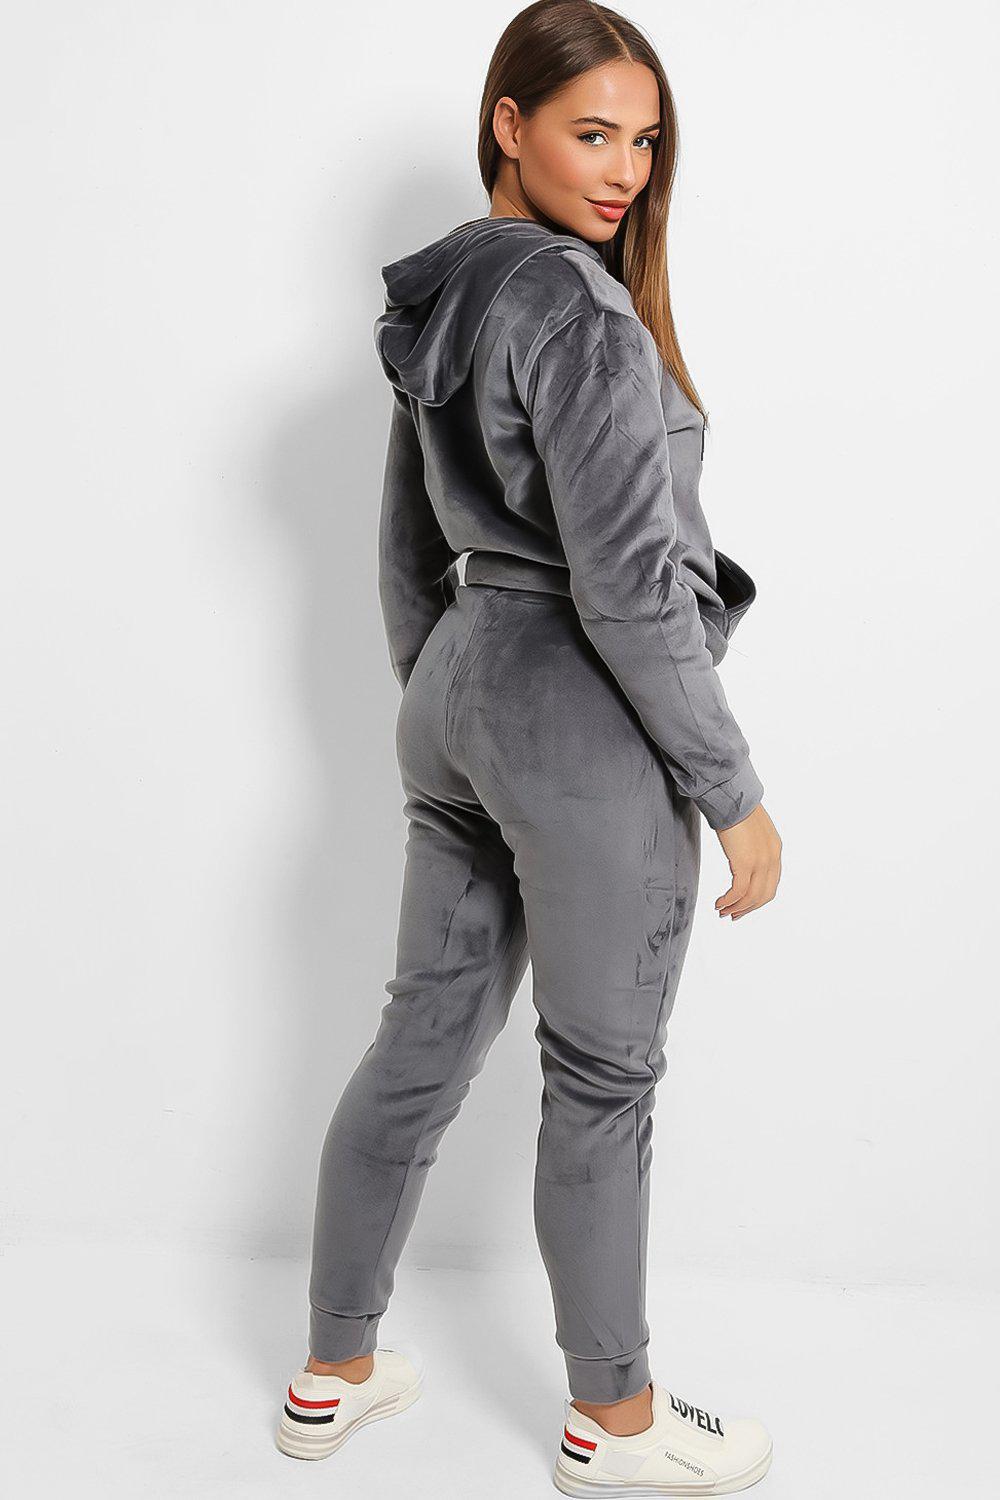 Grey Velour Thick Fleece Lined Sequinned J'adore Tracksuit – SinglePrice